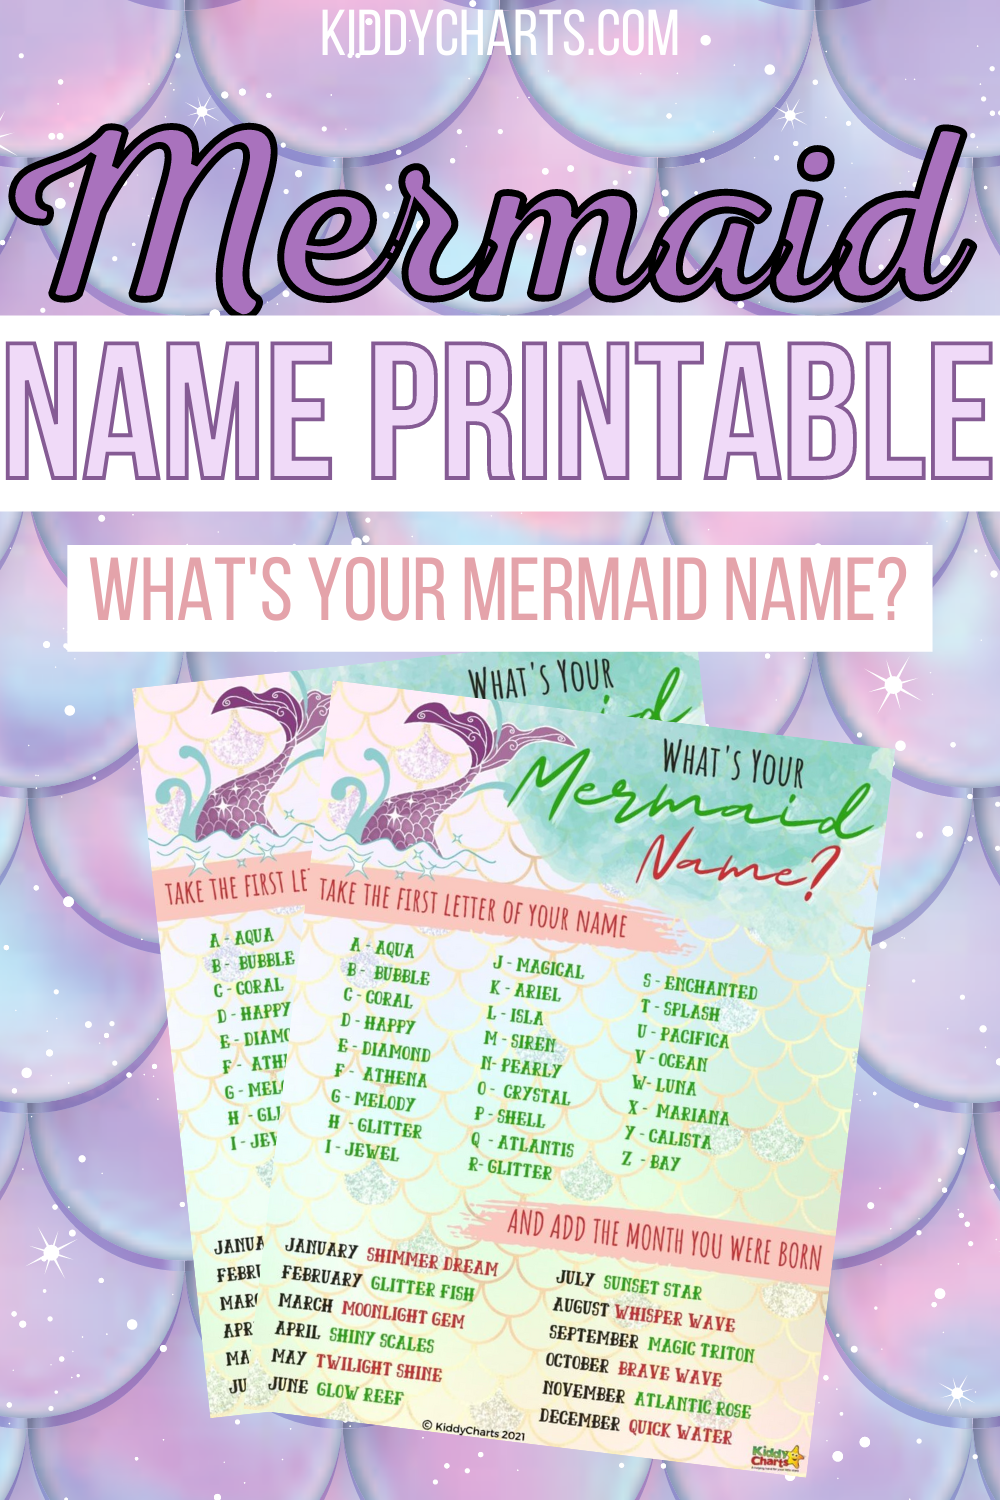 What's Your Mermaid Name A to Z - kiddycharts.com